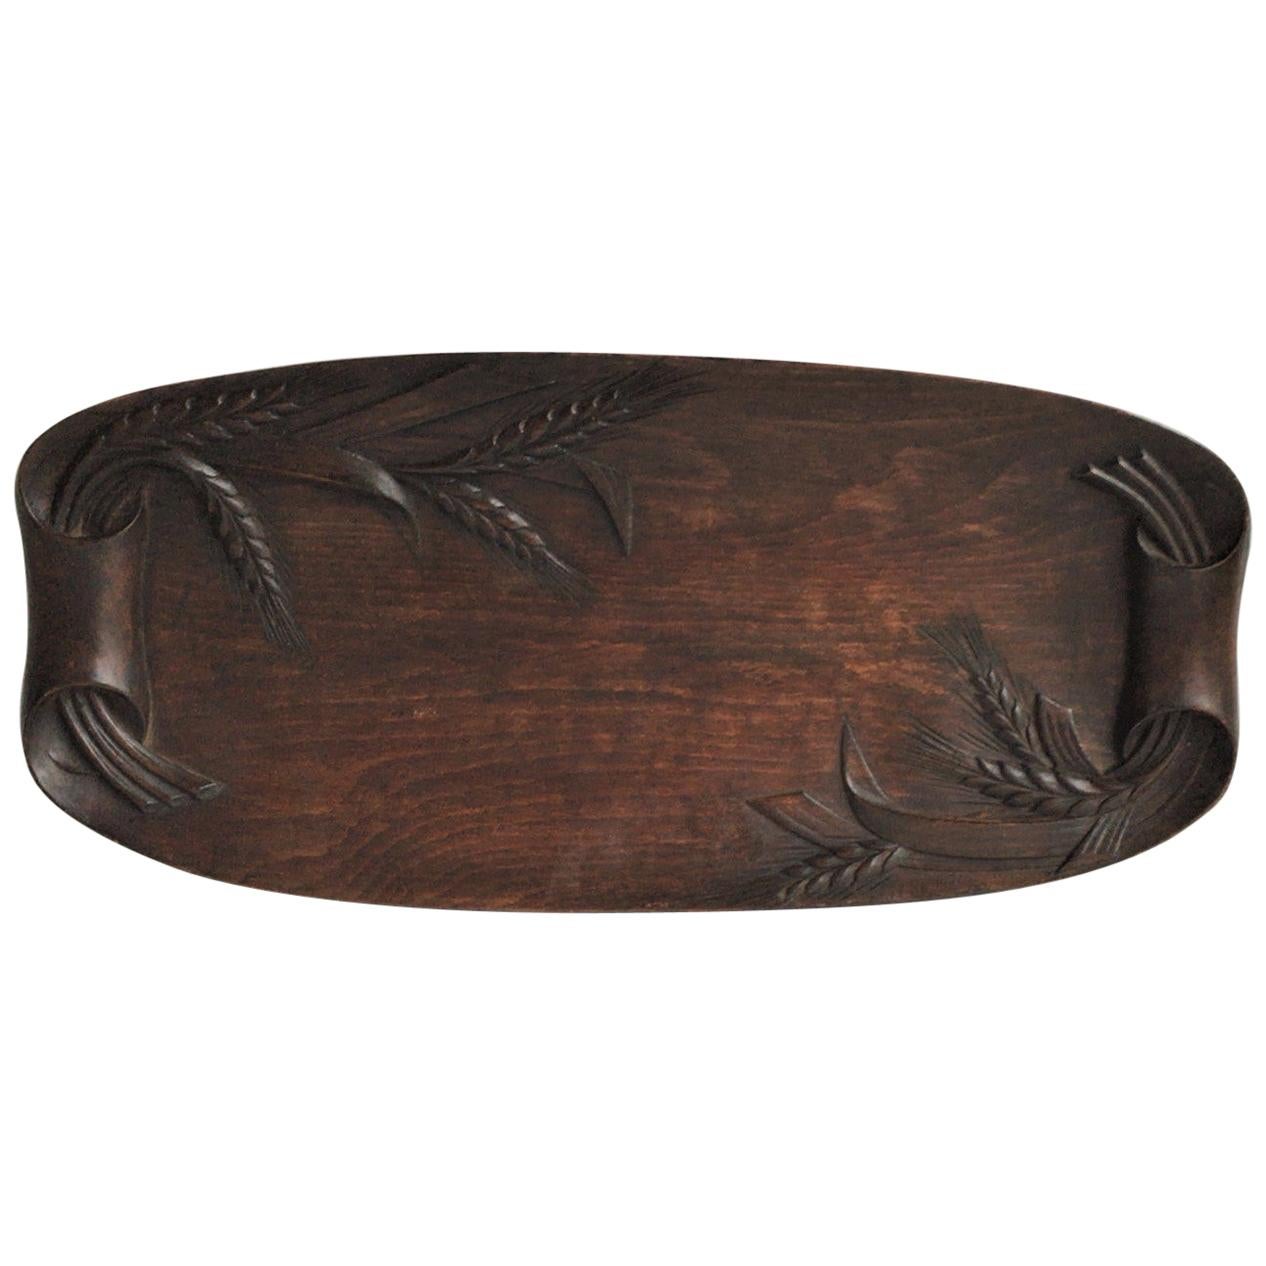 Large French Carved Wood Bread Platter with Ear of Wheat, circa 1900 For Sale